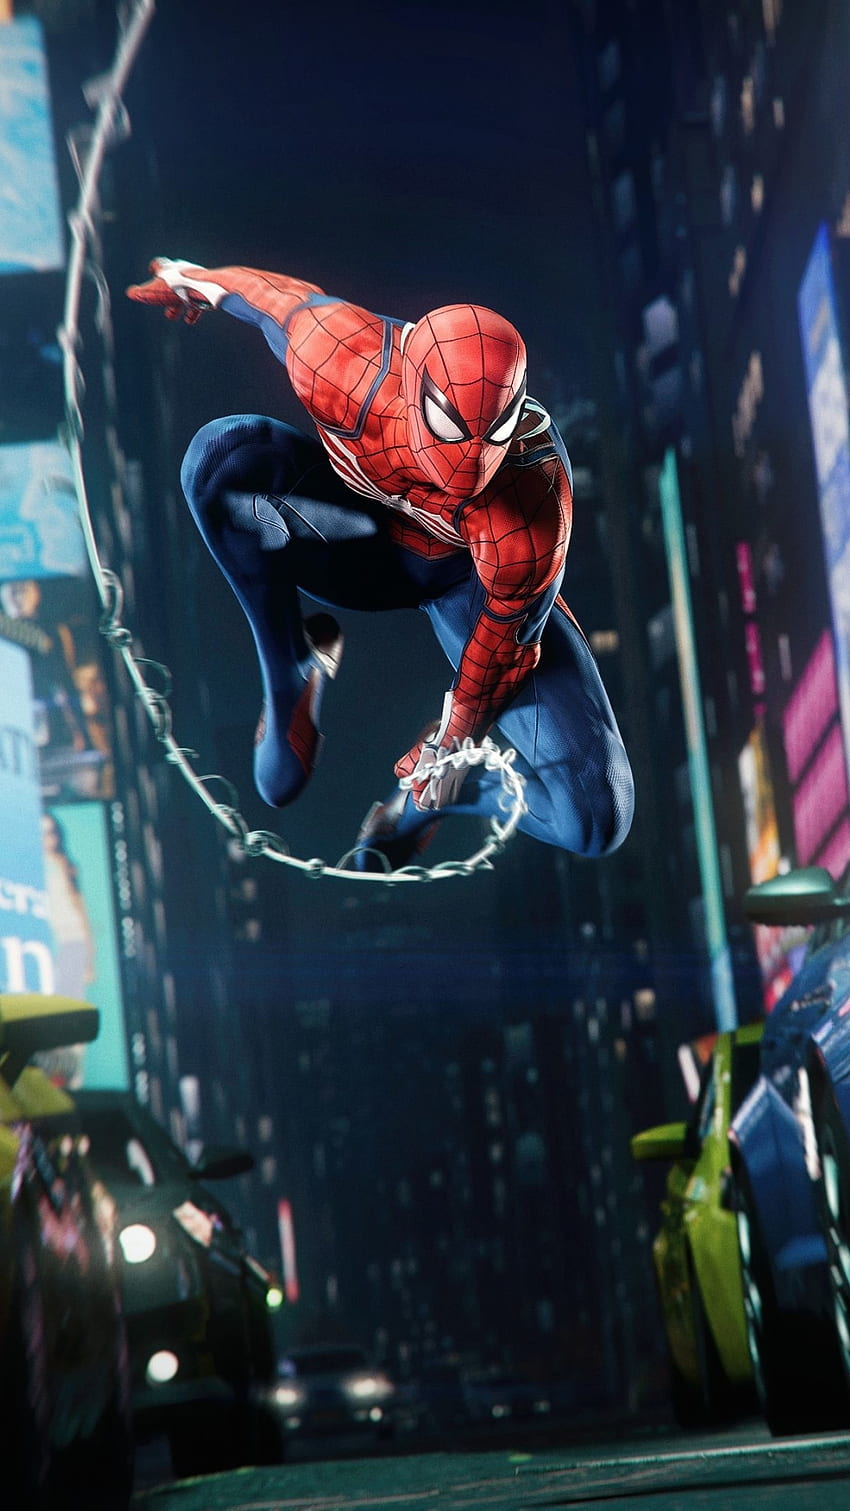 Marvel's Spider Man Remastered IPhone 7、6s、6 Plus、Pixel XL、One Plus 3、3t、5、Games、And Background Den、Spider Man Mobile HD電話の壁紙